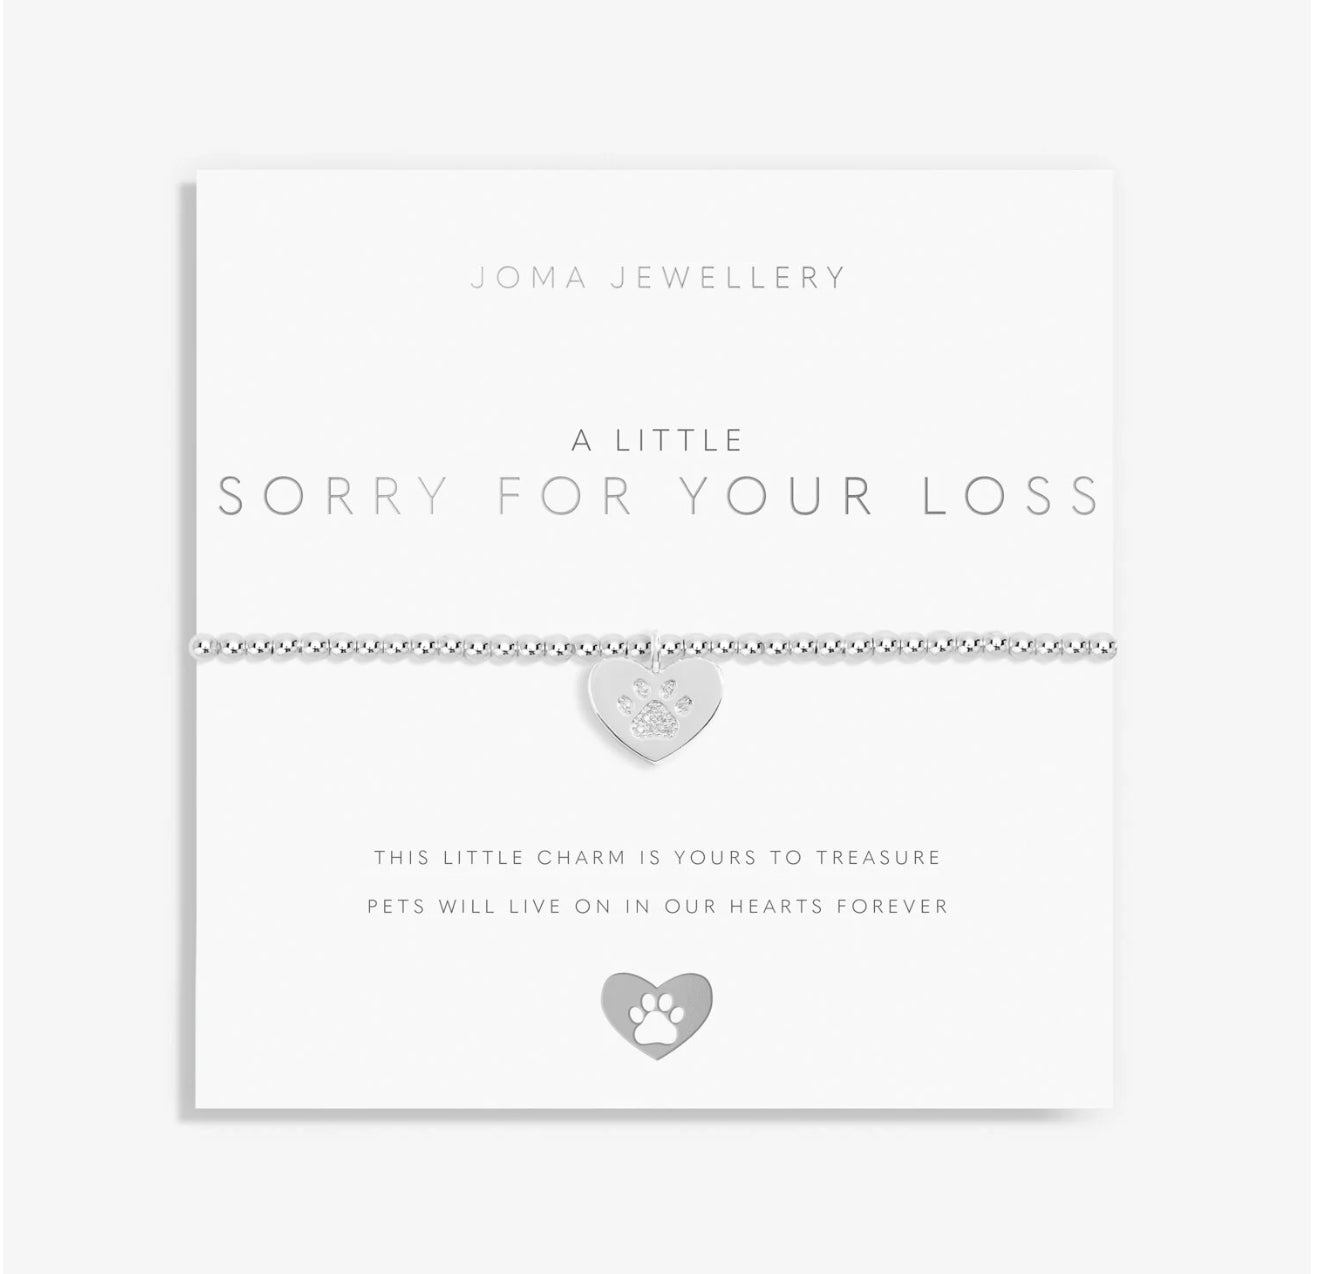 Joma Jewellery Sorry for your loss (Pets)